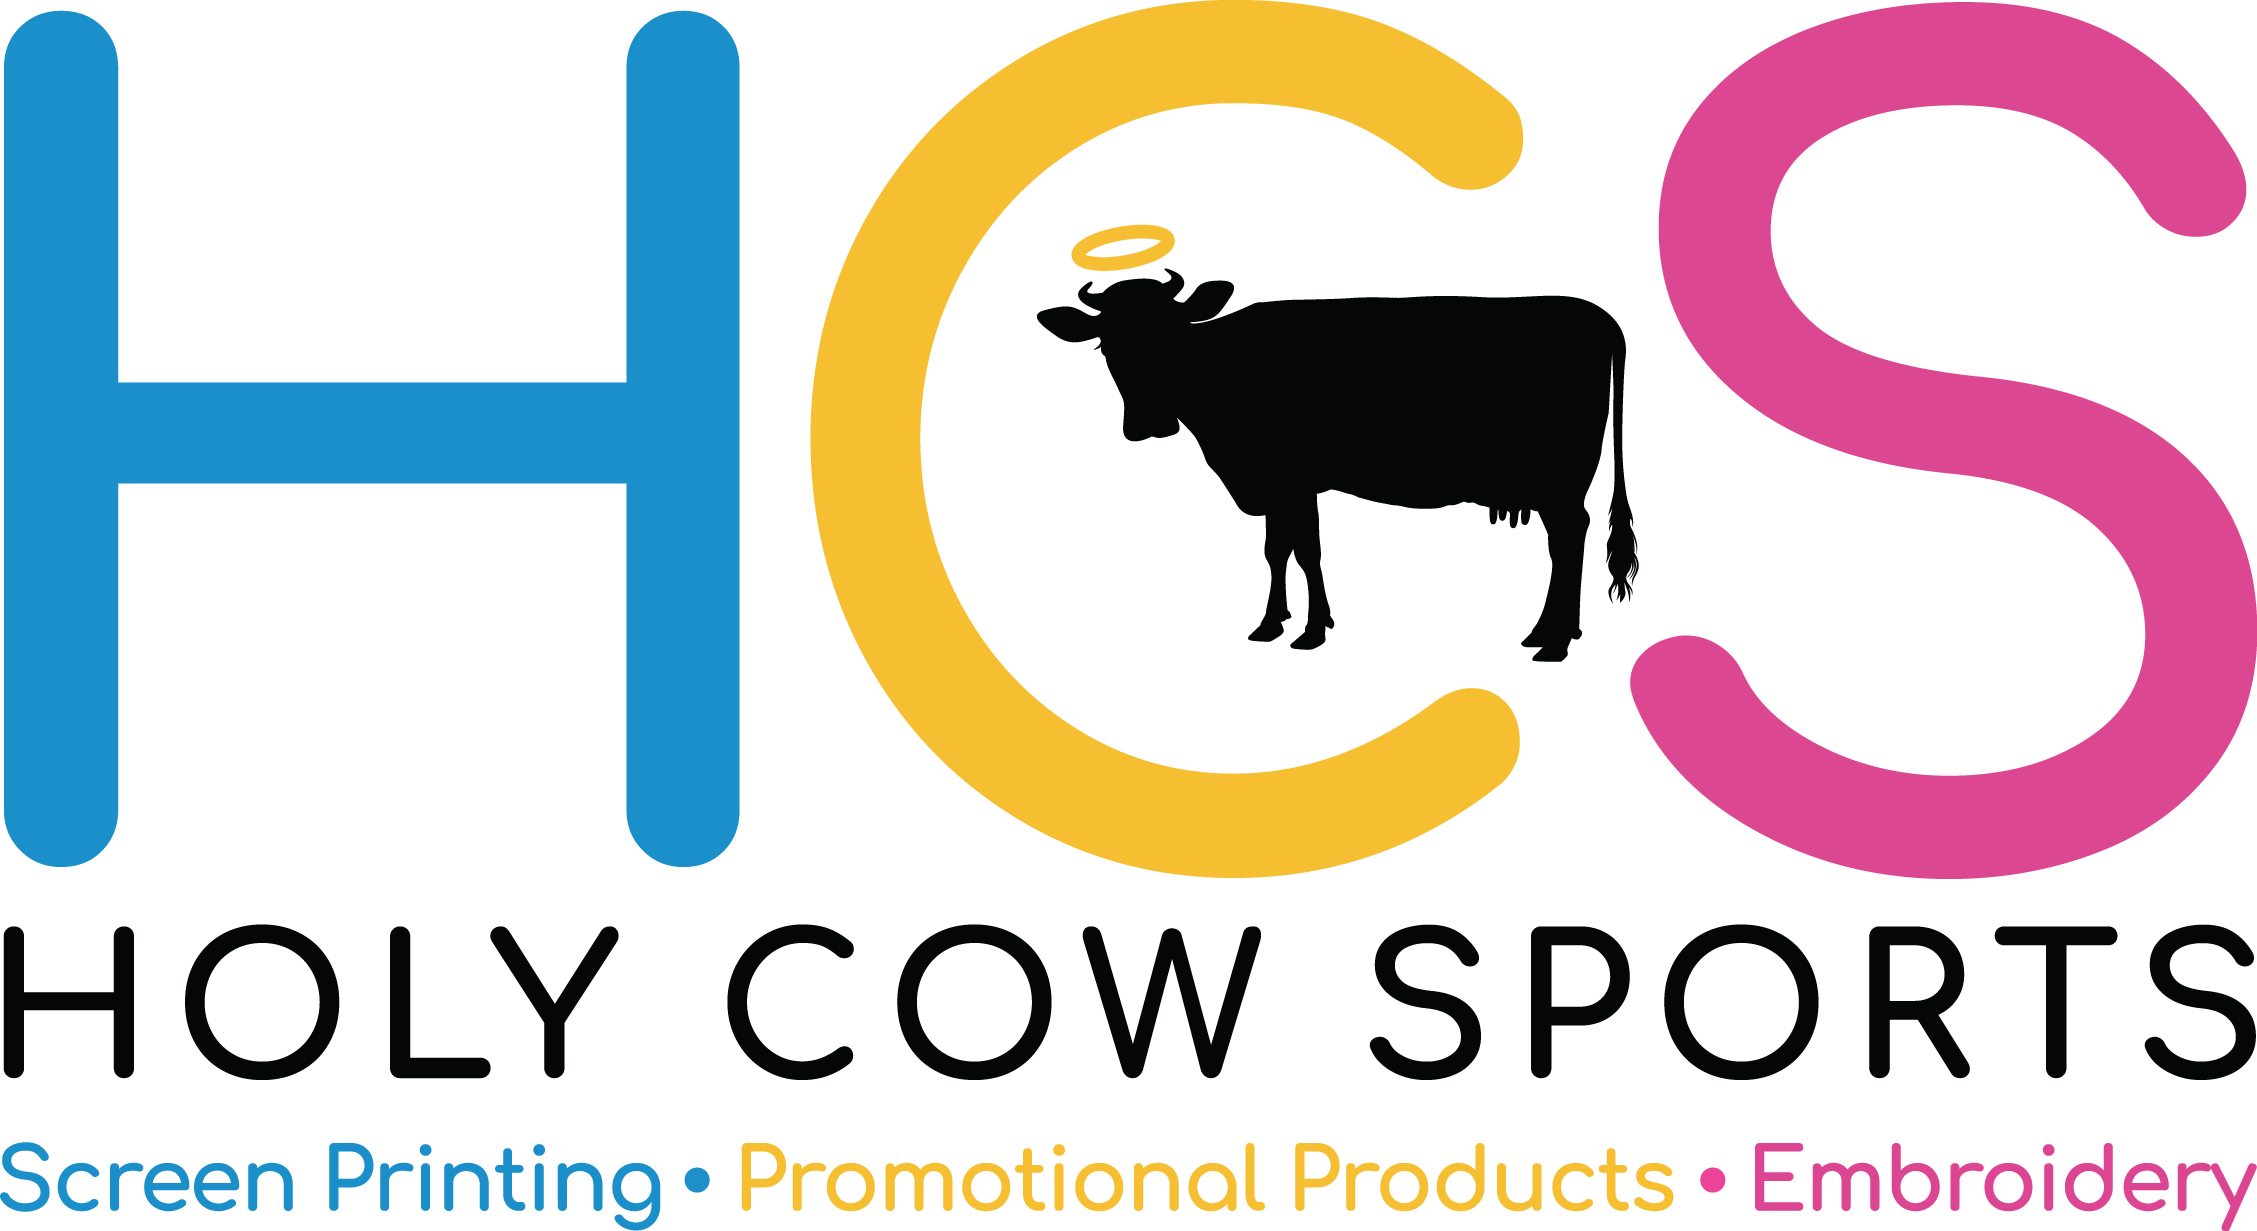 Results - Holy Cow Product Sports